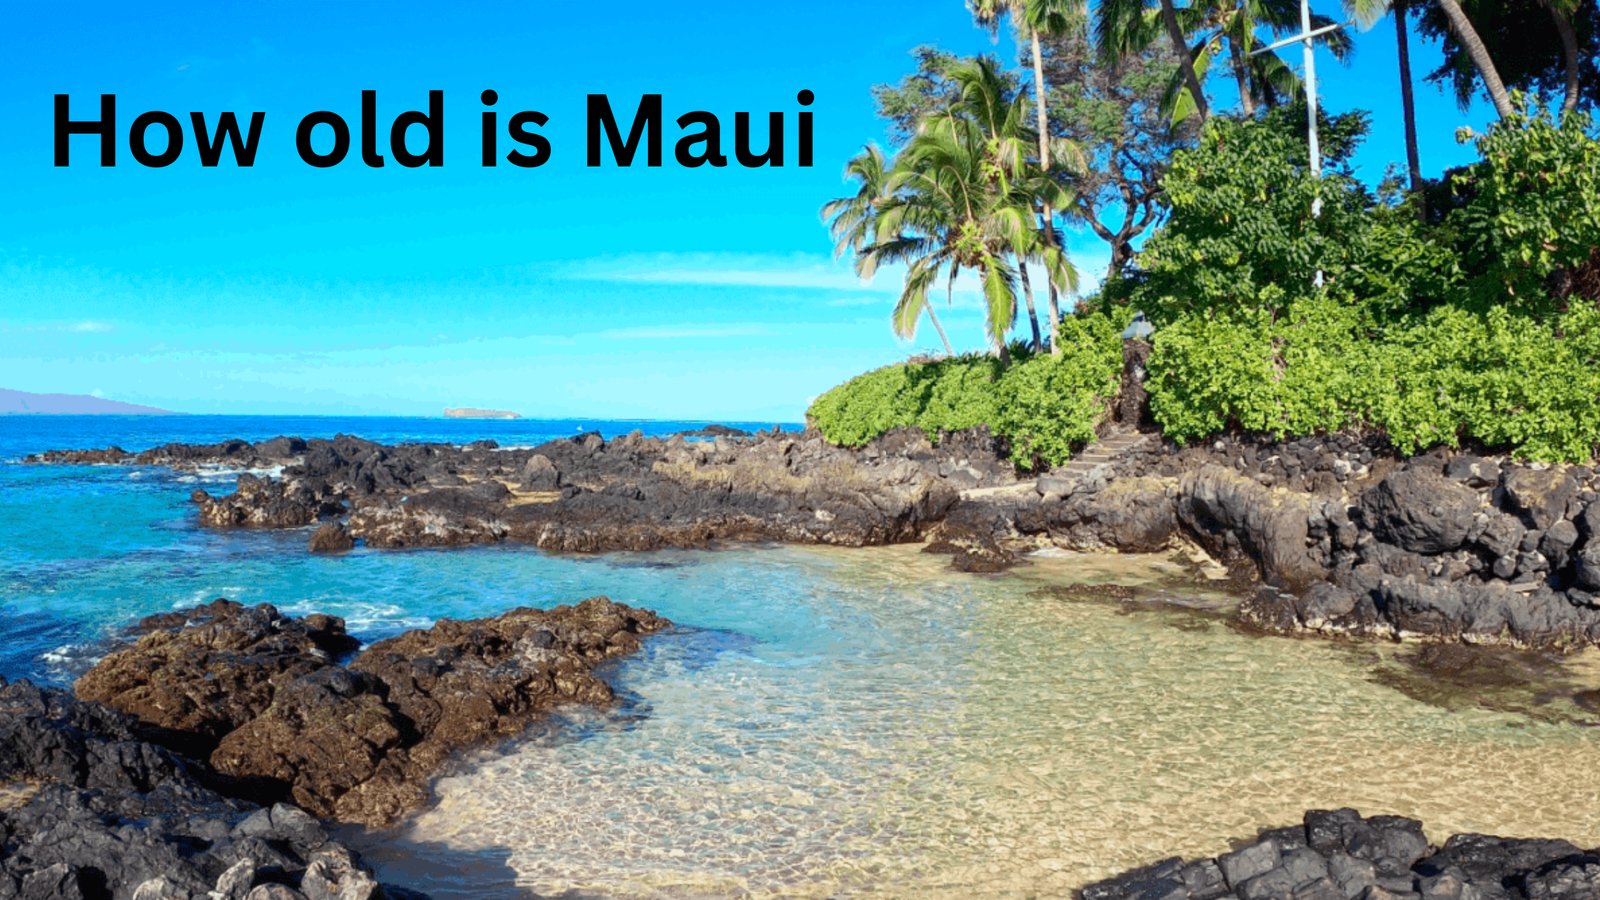 How old is Maui?